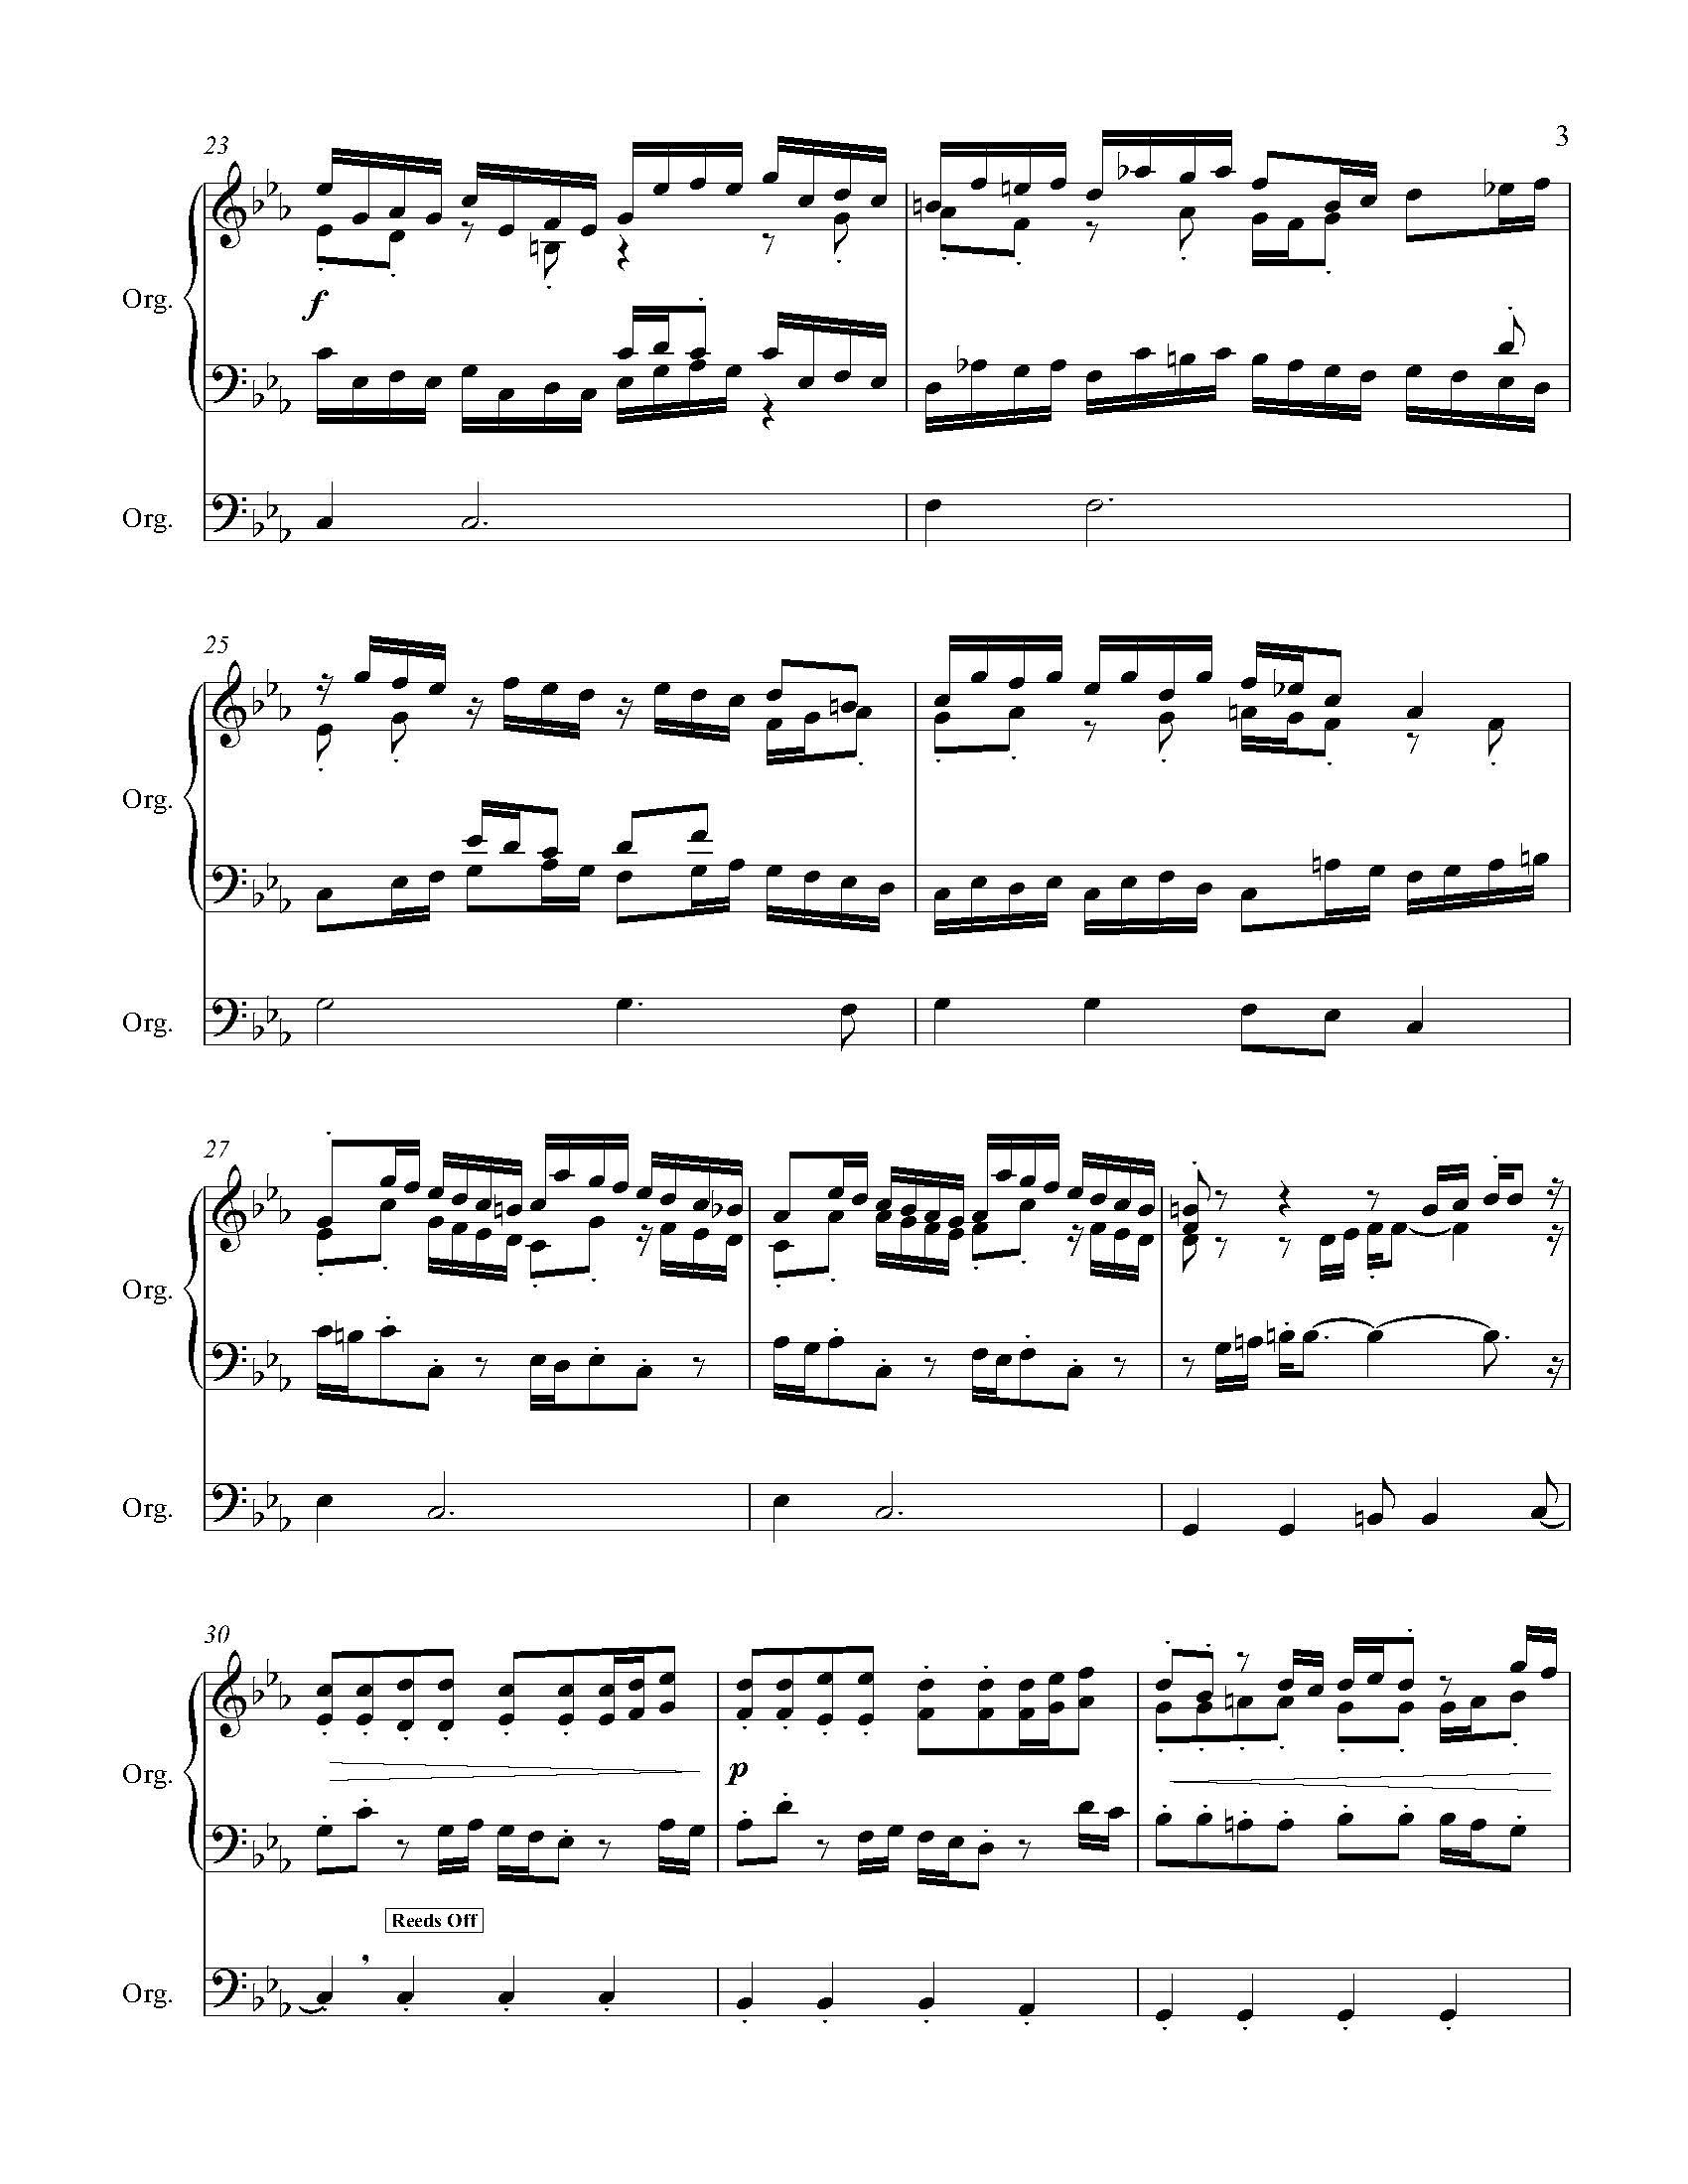 Baroque Fantasy on Go Down Moses - Complete Score_Page_09.jpg